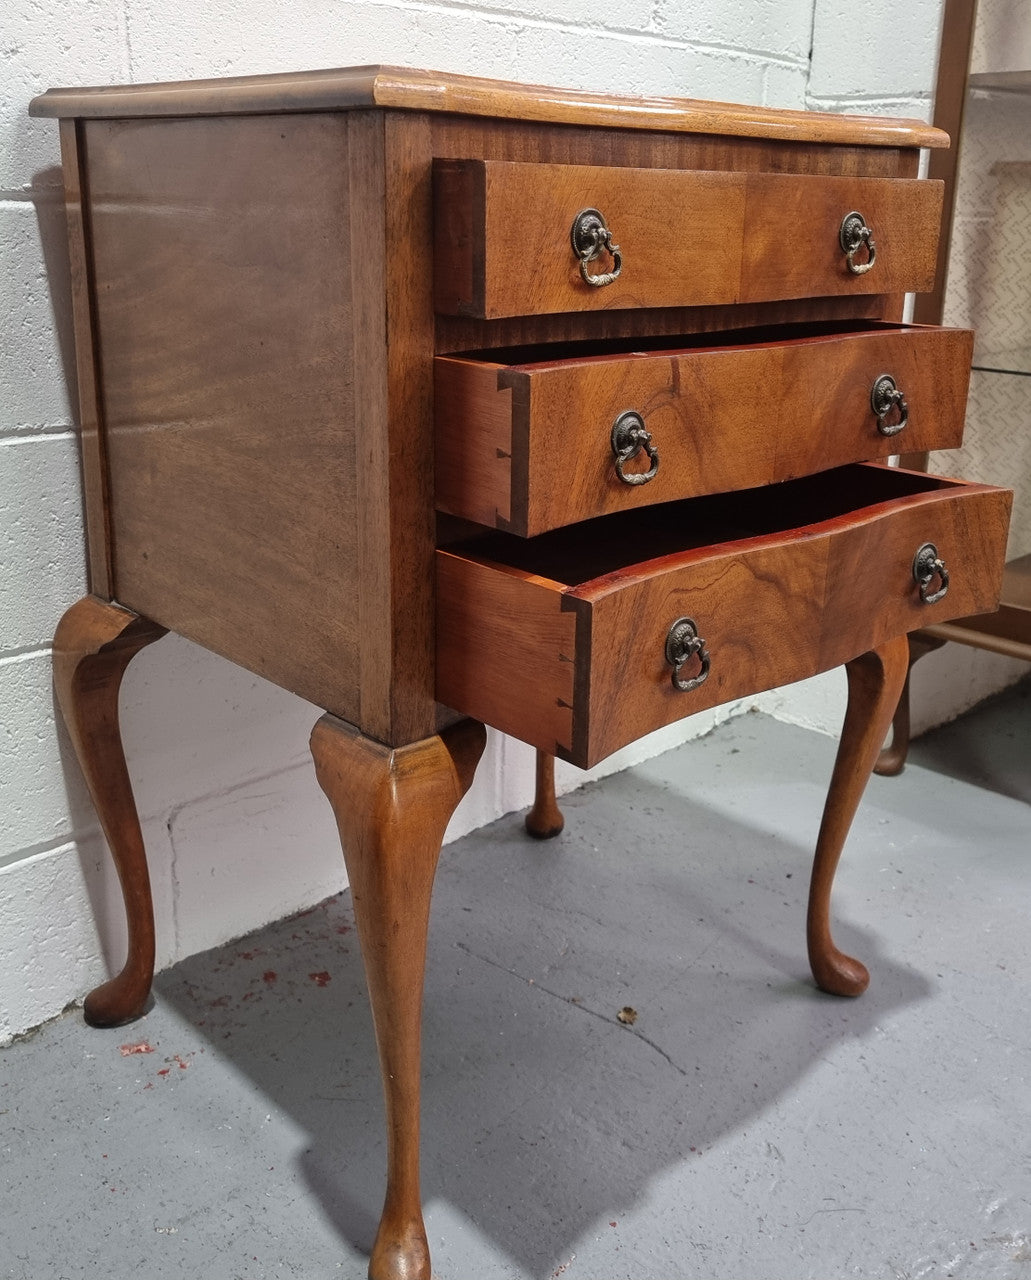 Antique Queen Anne style figured Walnut Bedside cabinet with 3 drawers. It is in good original detailed condition.